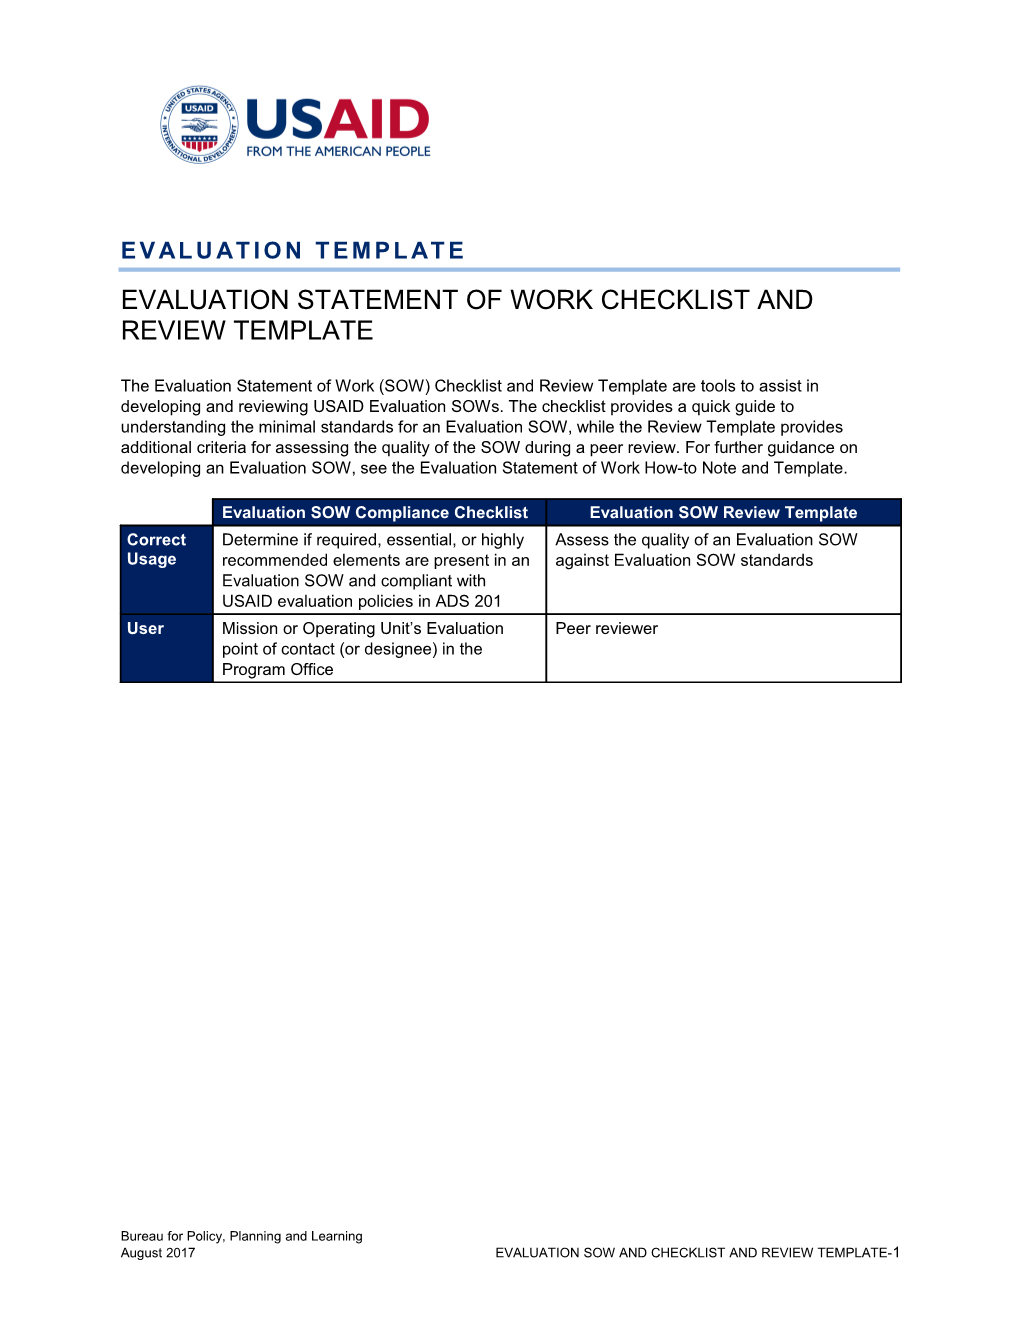 Template Evaluation SOW Checklist and Review